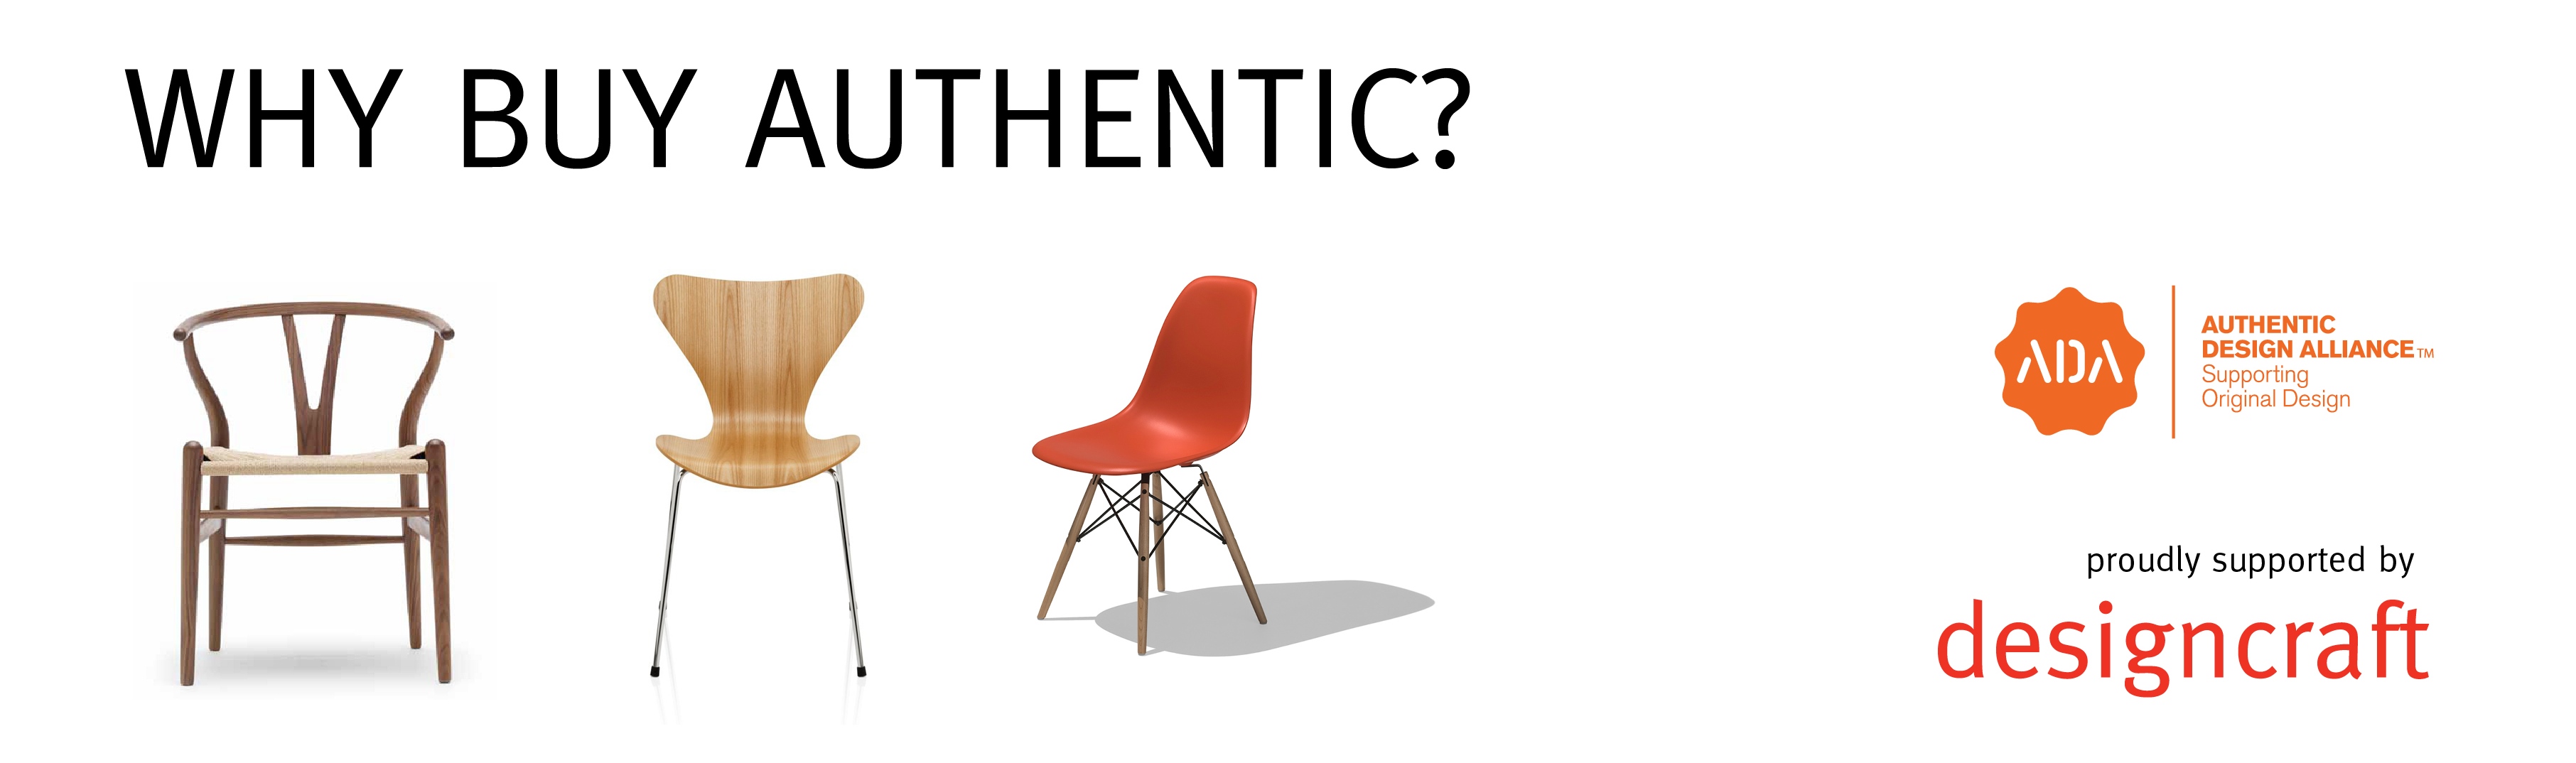 Why you should buy authentic design / authentic furniture